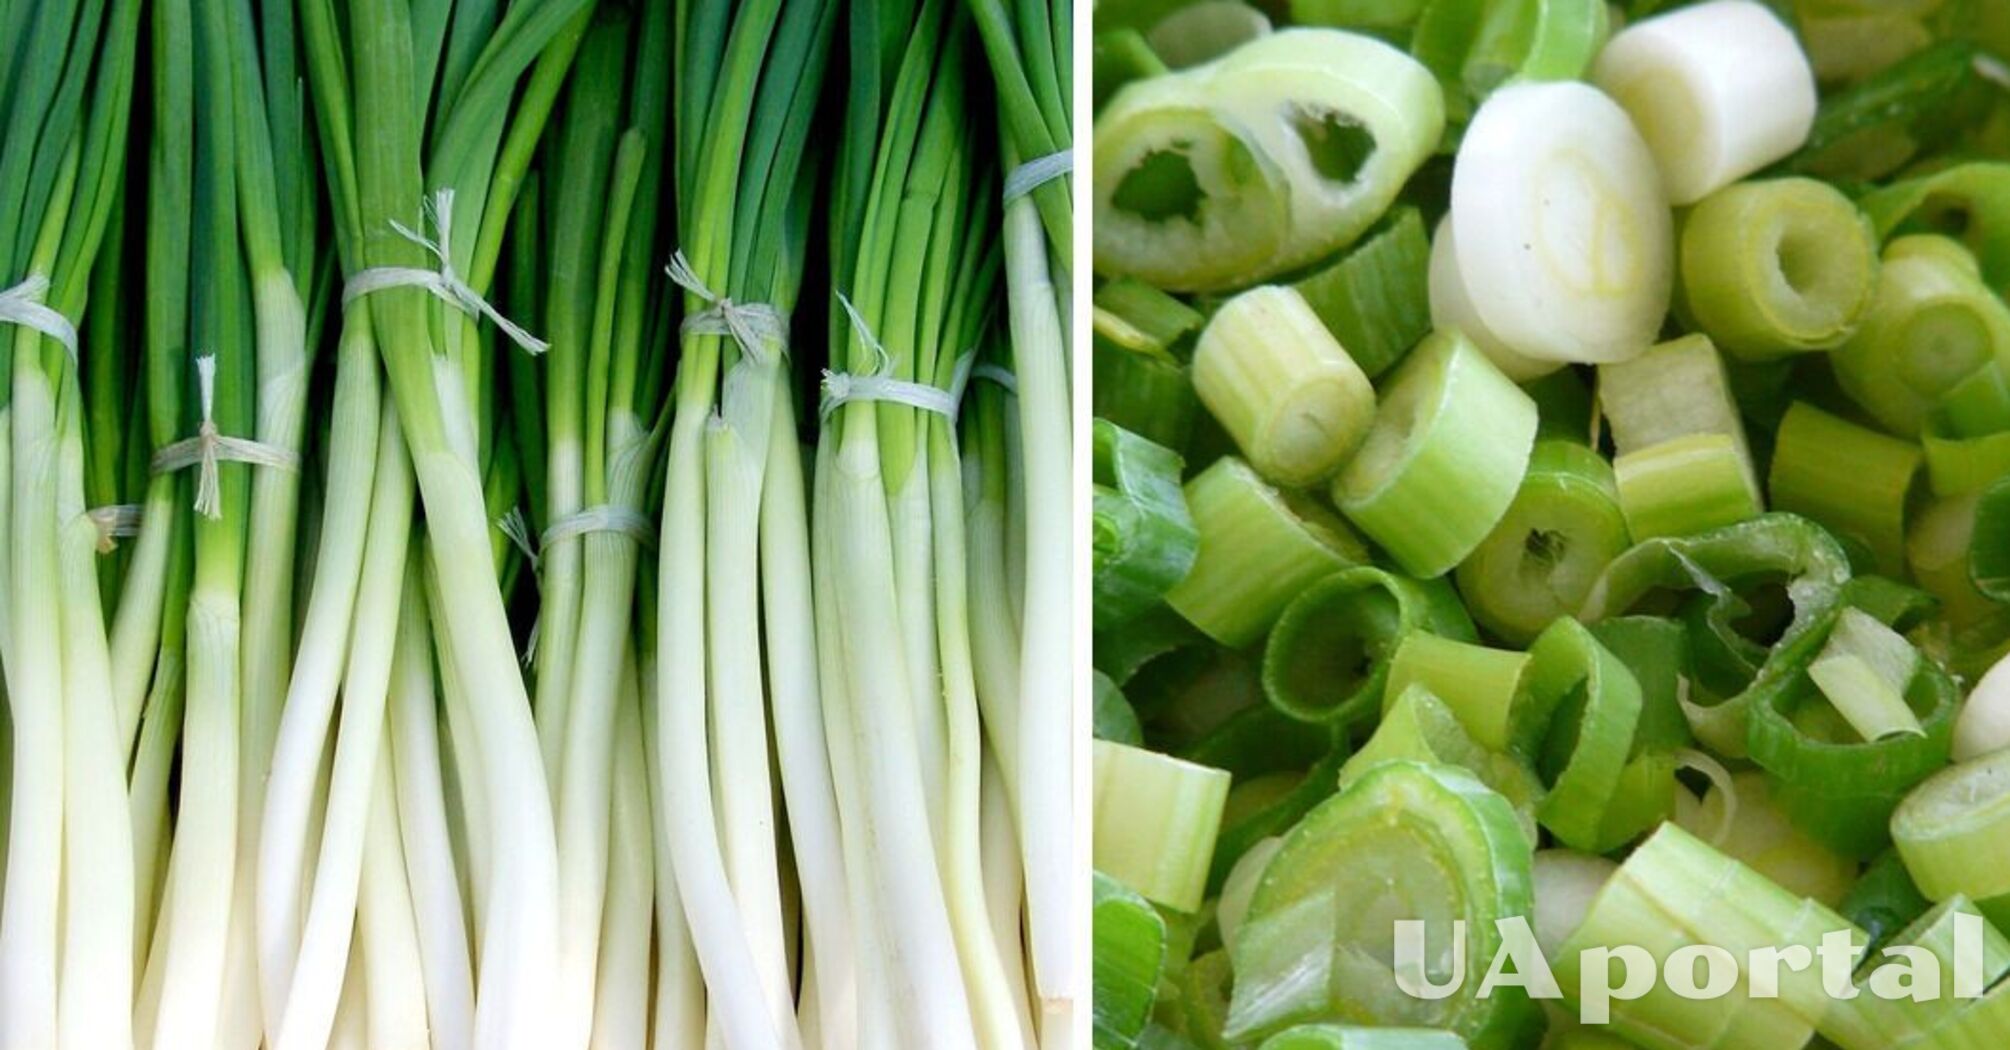 Experts explain how to freeze green onions to preserve their flavor